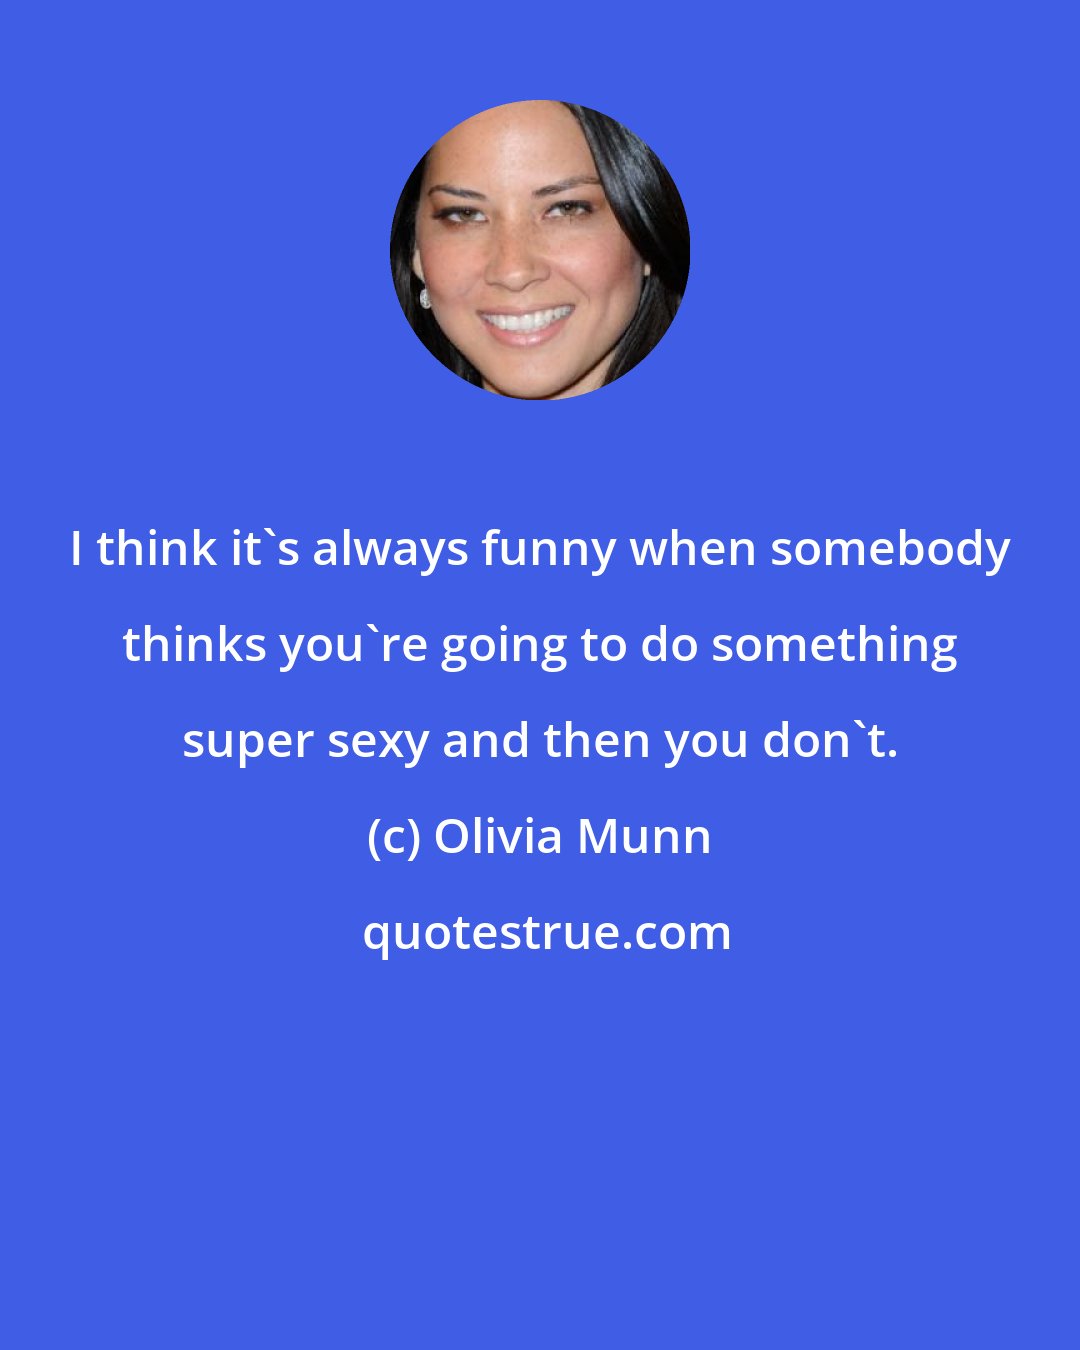 Olivia Munn: I think it's always funny when somebody thinks you're going to do something super sexy and then you don't.